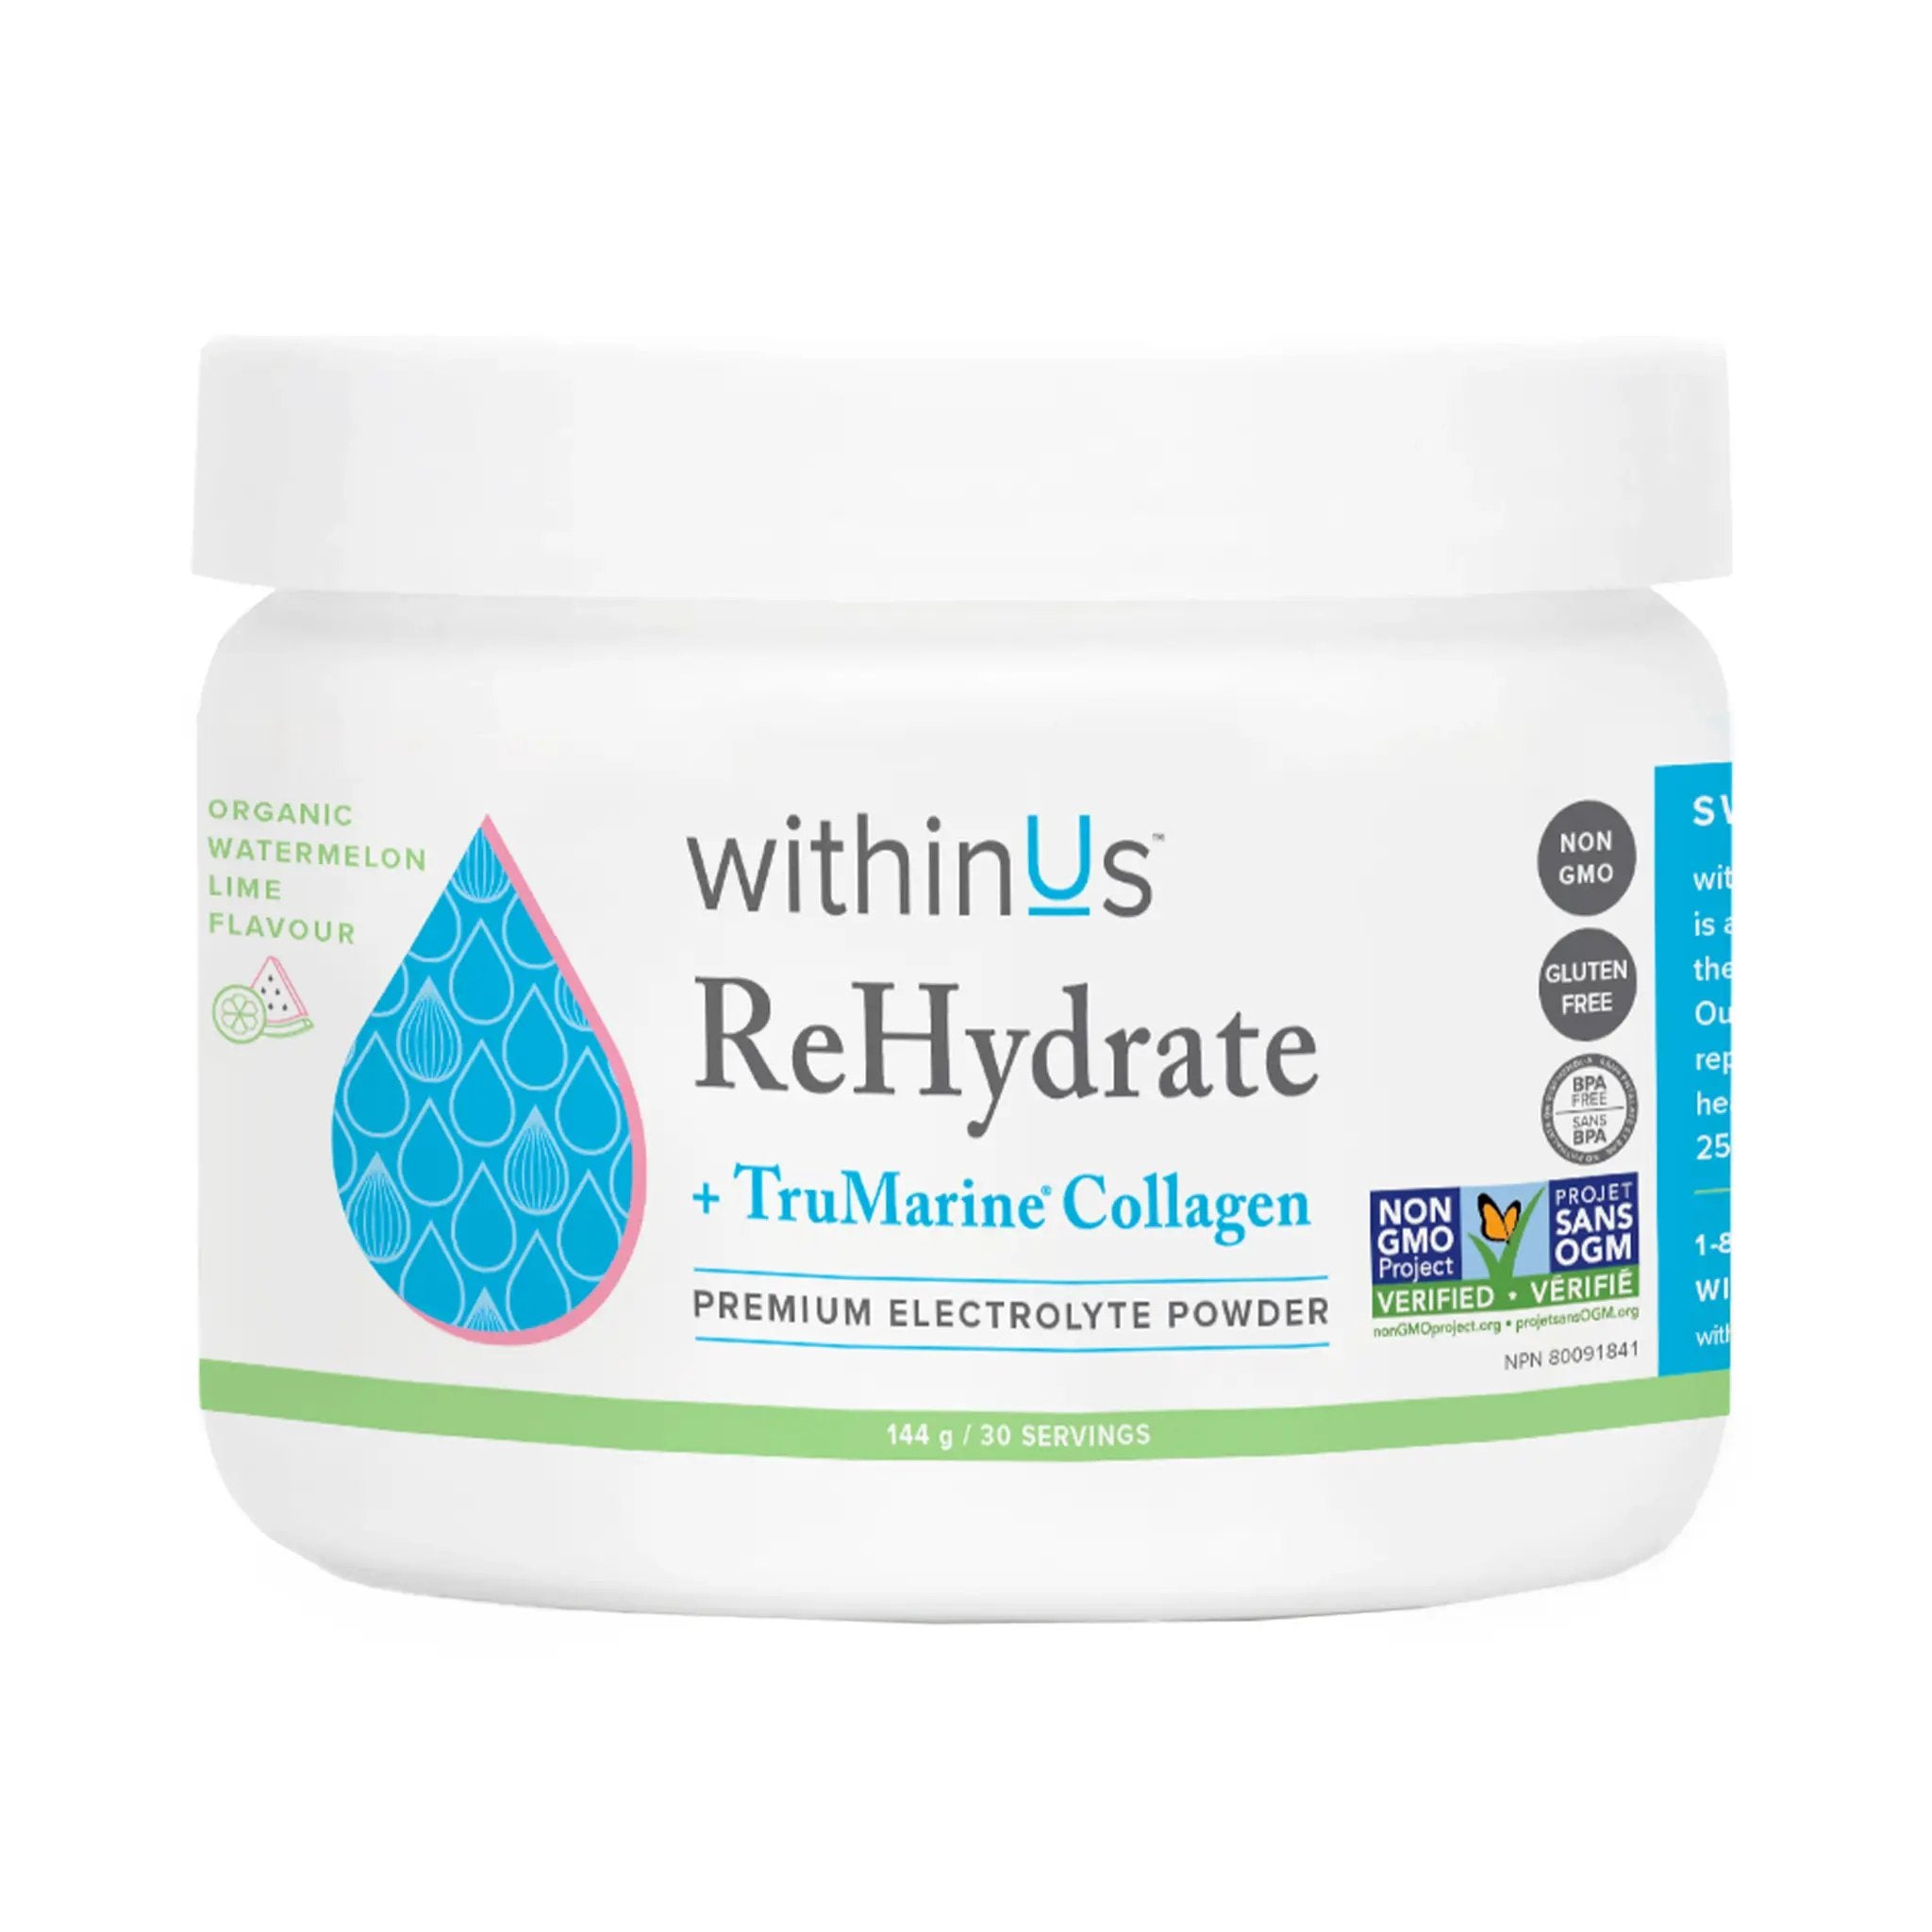 ReHydrate + TruMarine Collagen - Watermelon + Lime by WithinUs